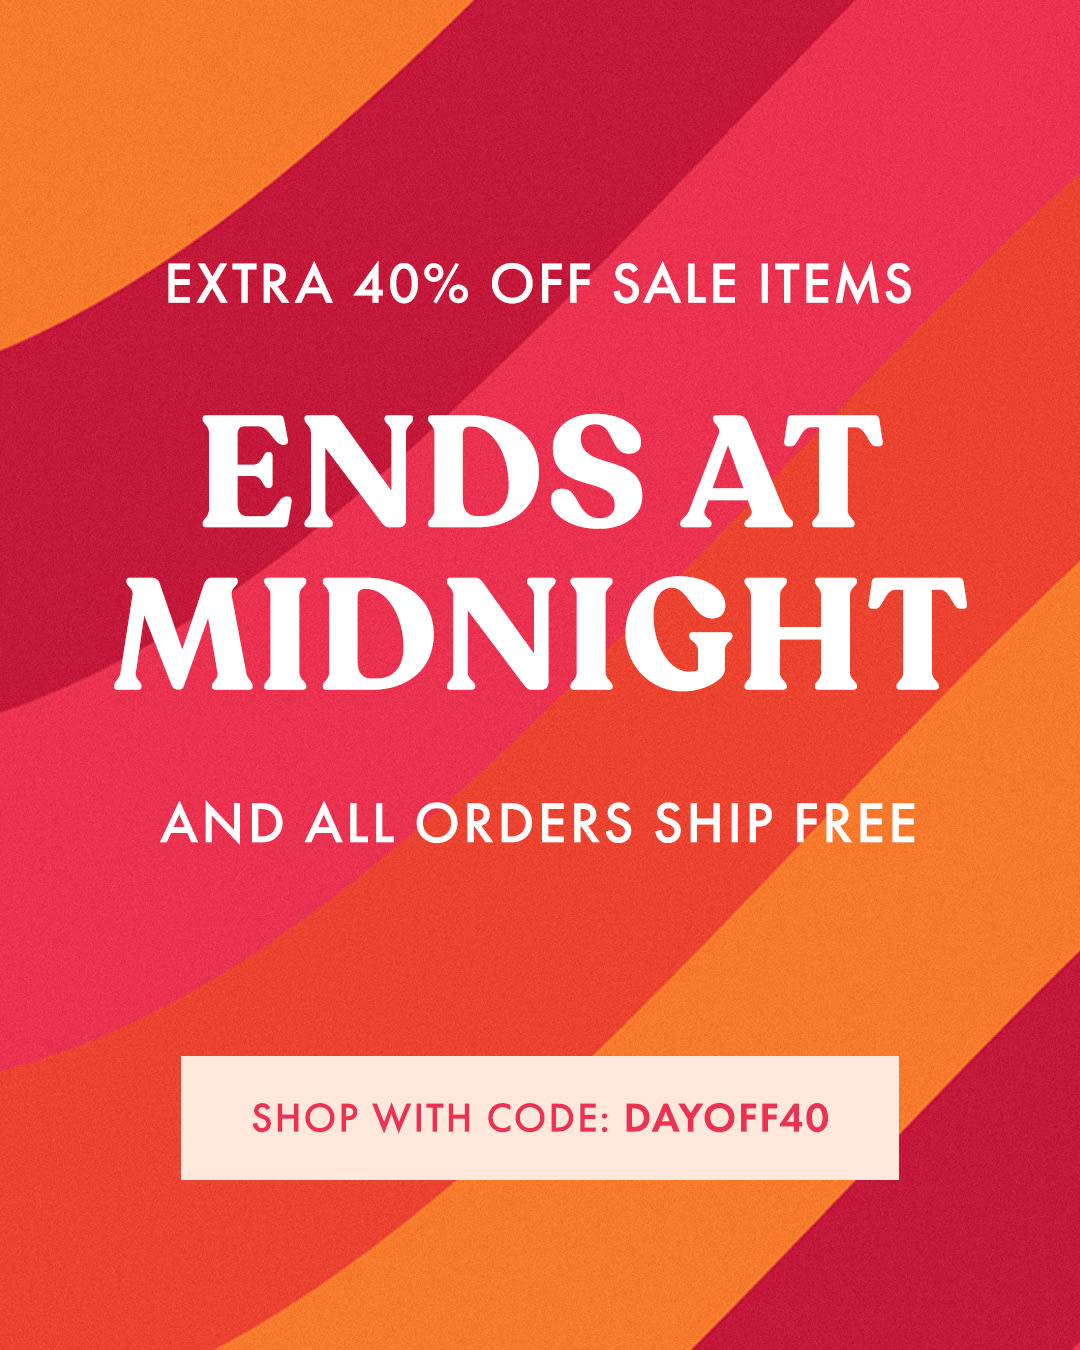 Our Labor Day Sale Ends at MidnightDon't Miss Out on Free Shipping